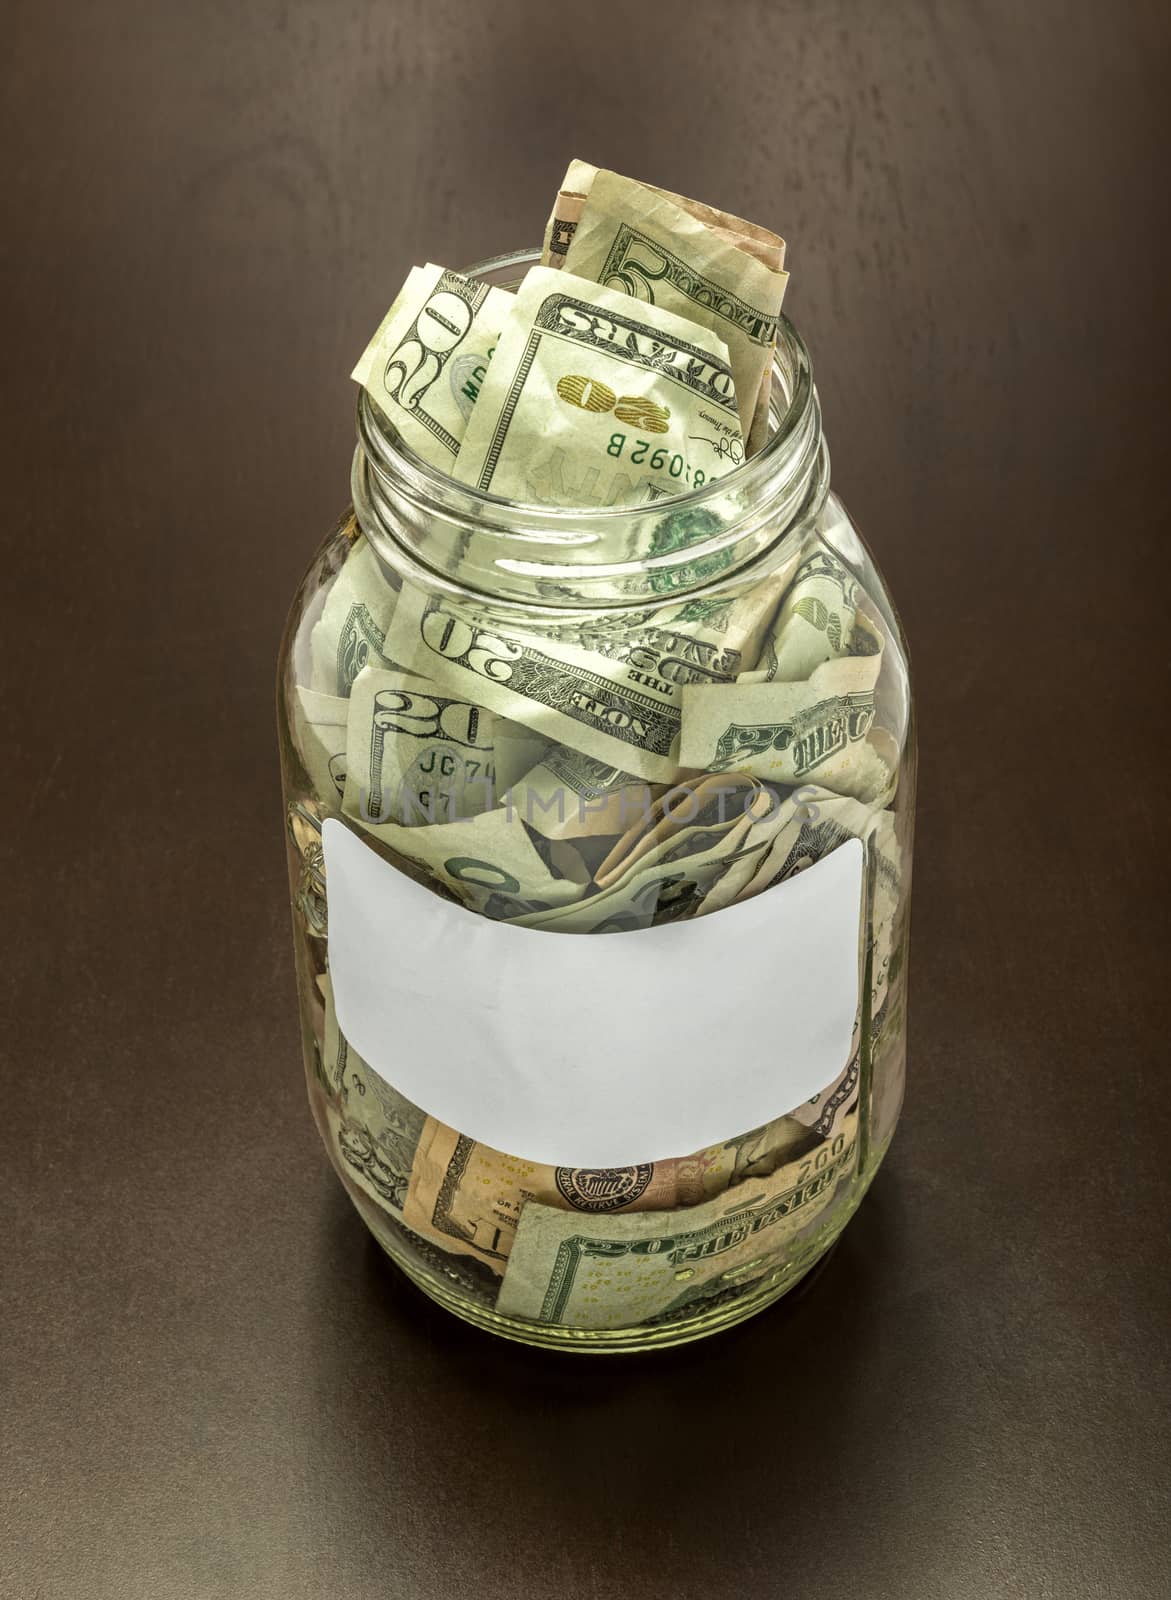 Clear glass cash jar full of money on a brown background.